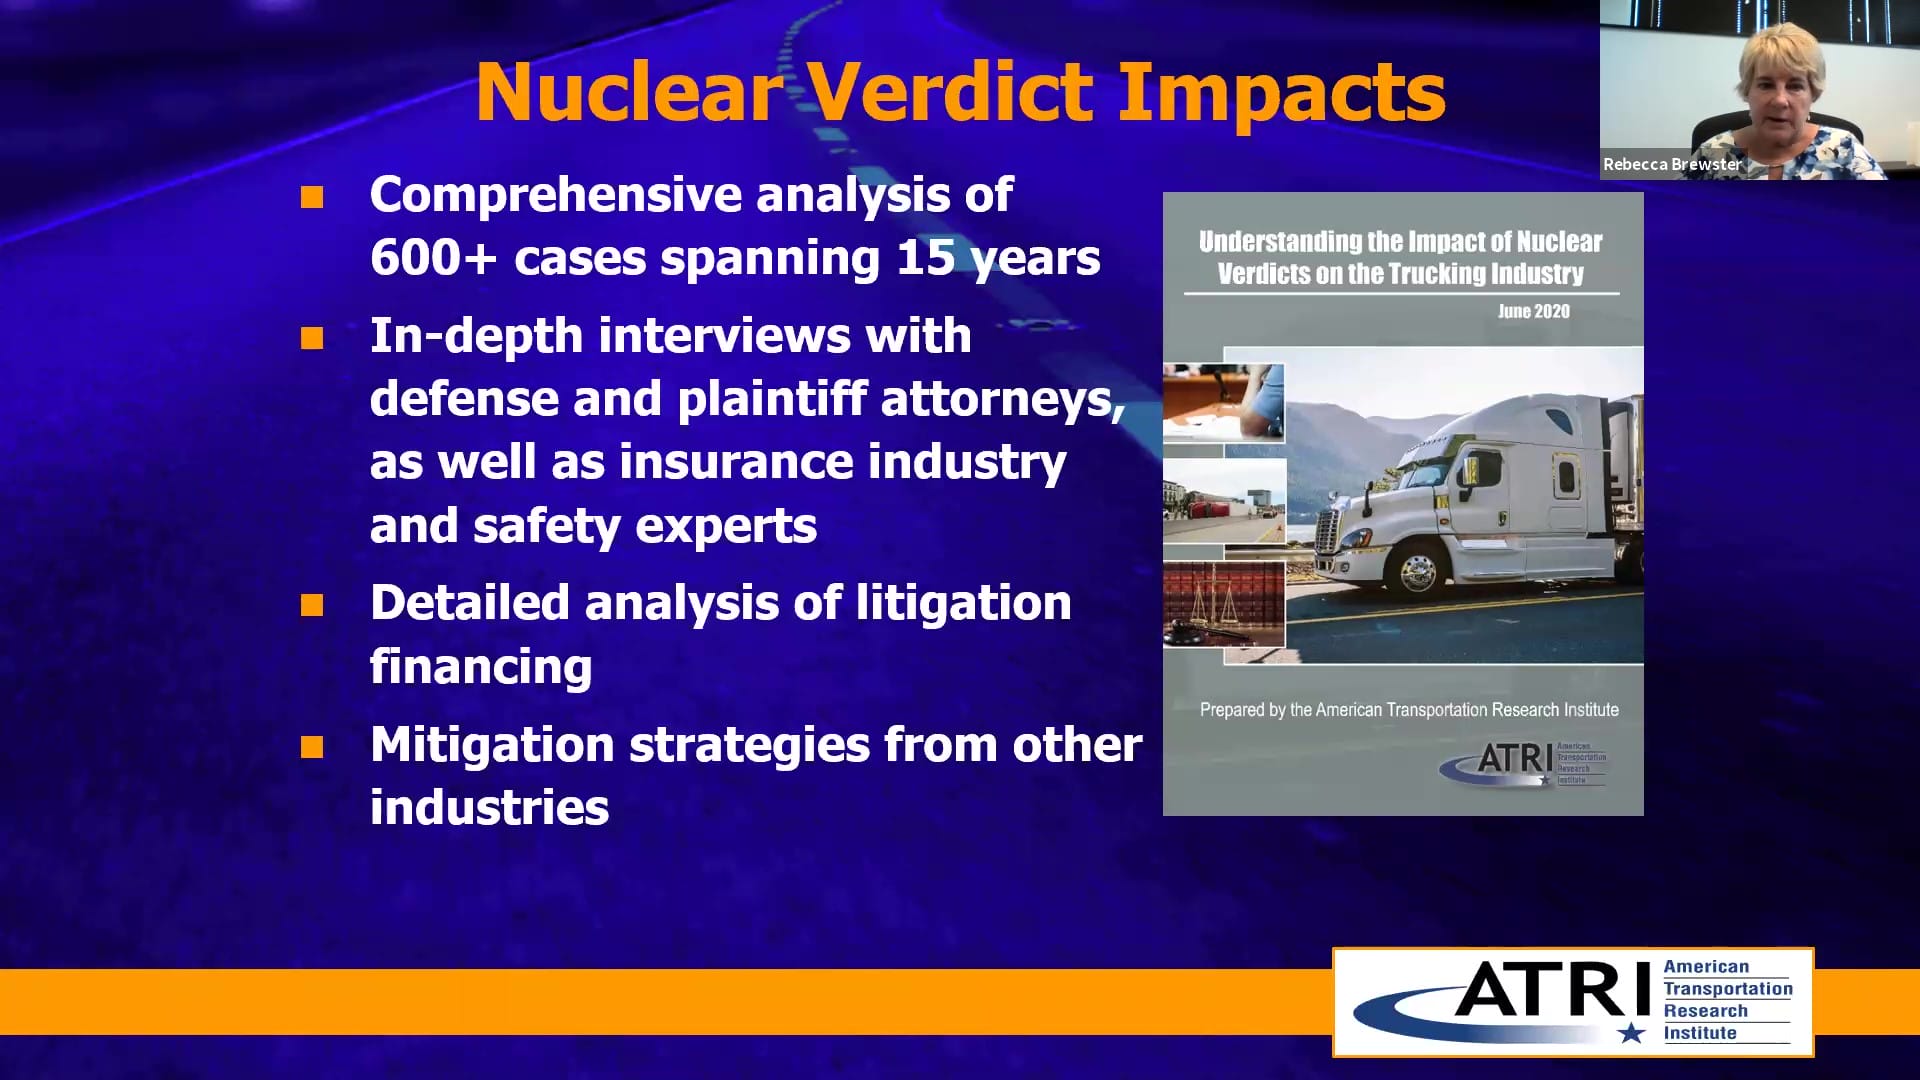 Trucking Industry Concerns 2020 from ATRI Nuclear Verdict Impacts